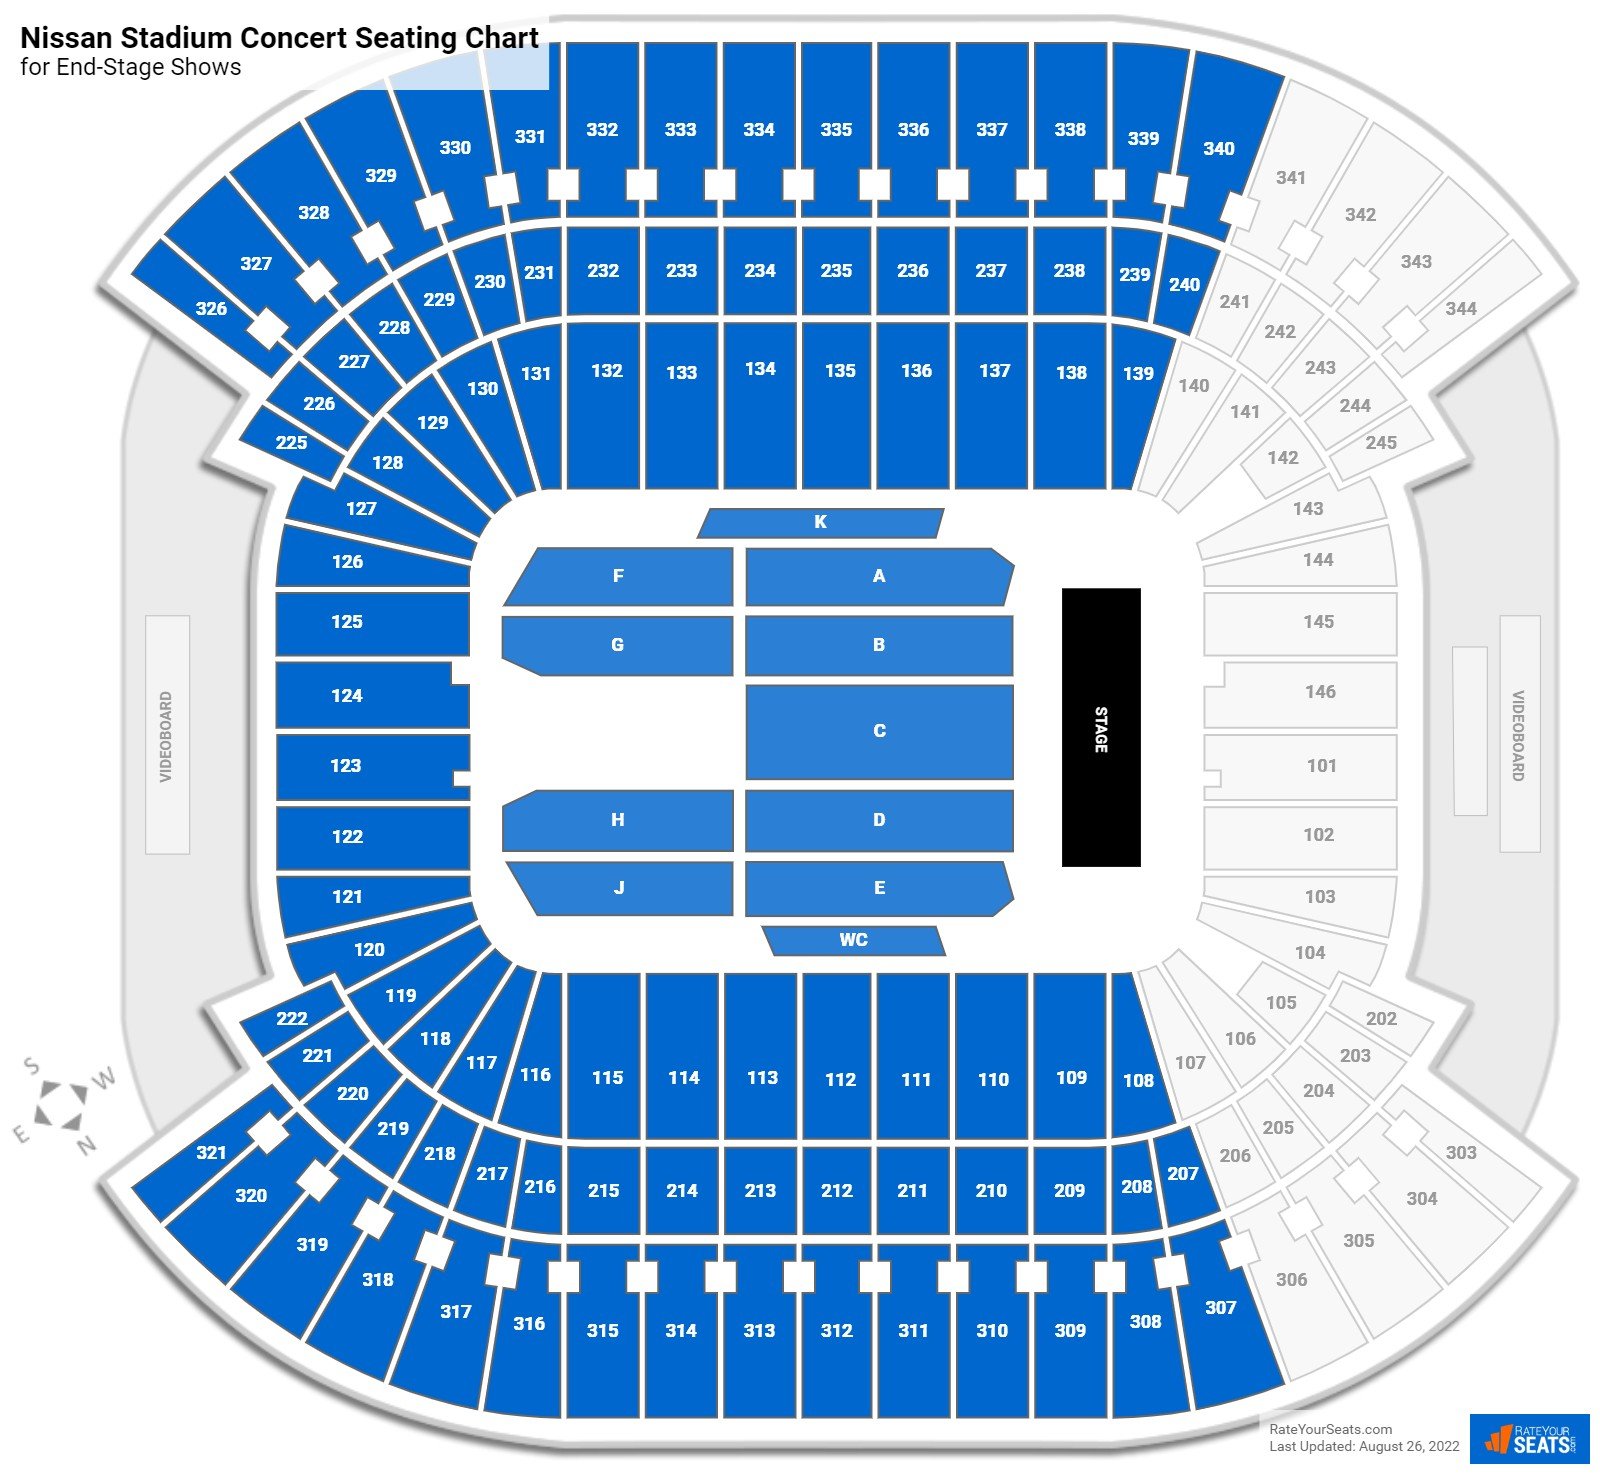 Nissan Stadium Seating Charts for Concerts